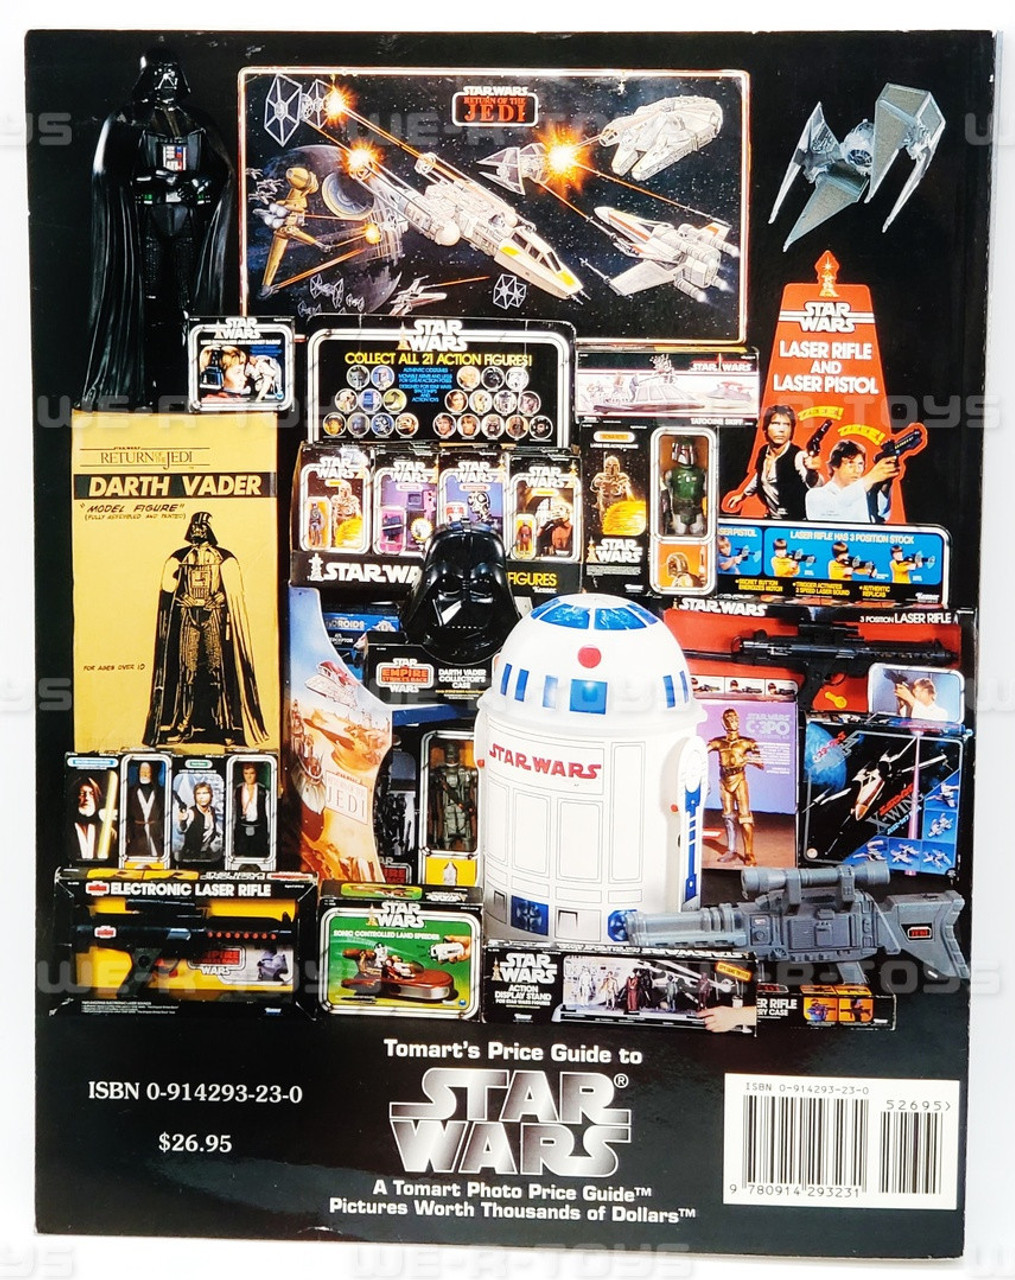 https://cdn11.bigcommerce.com/s-cy4lua1xoh/images/stencil/1280x1280/products/29674/269413/star-wars-tomarts-price-guide-to-worldwide-star-wars-collectibles-signed-1994-used__93332.1693990292.jpg?c=1?imbypass=on